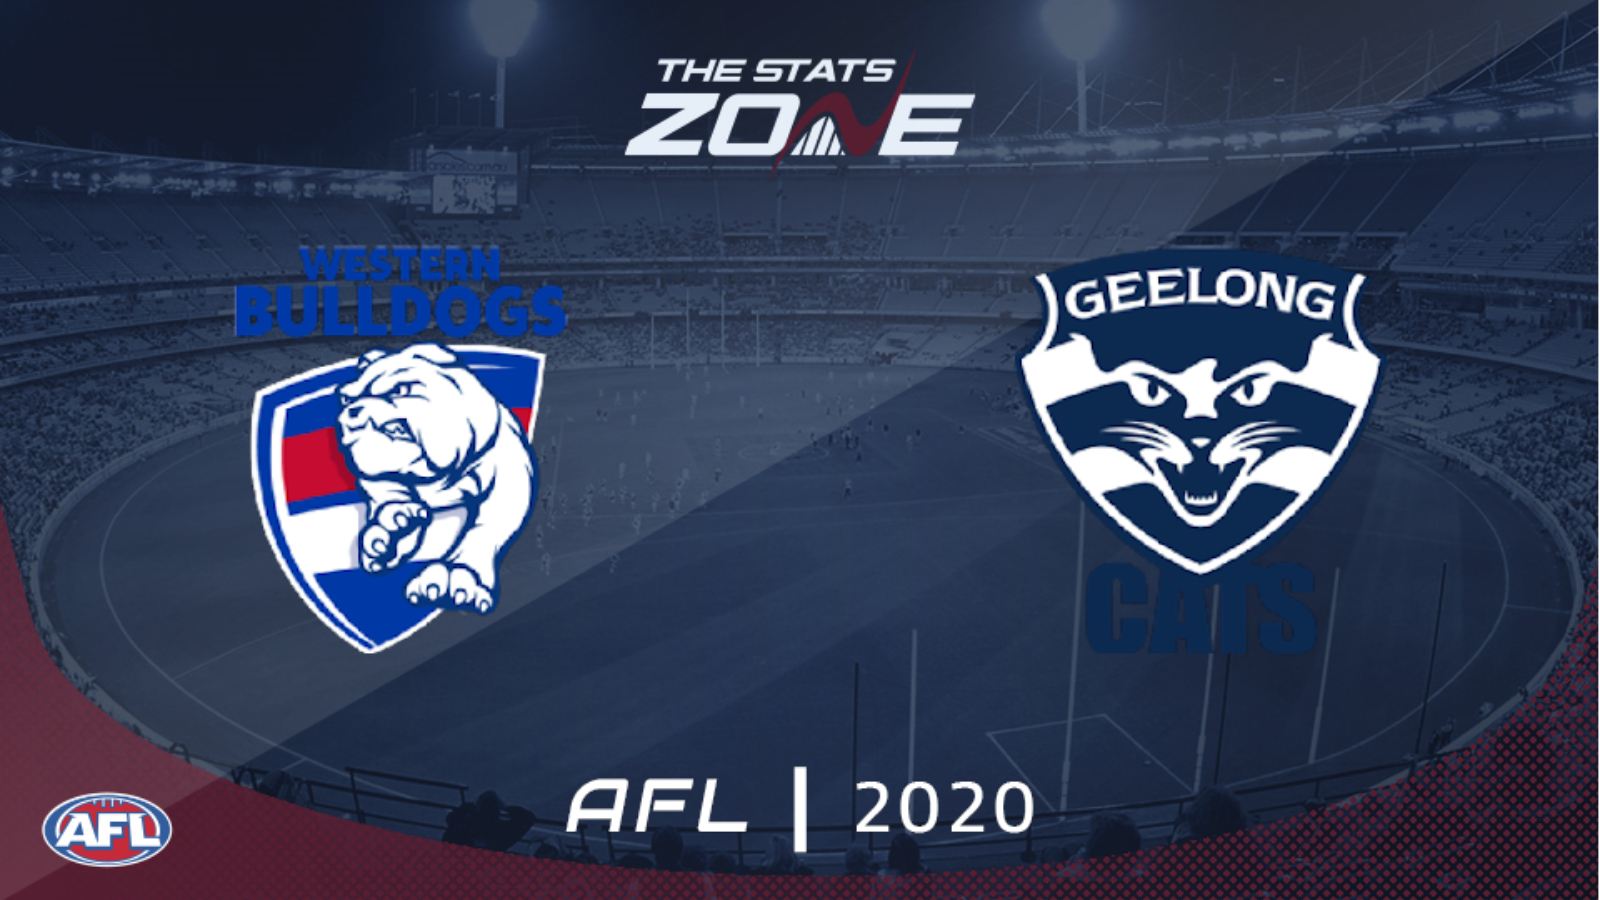 2020 Afl Western Bulldogs Vs Geelong Cats Preview Prediction The Stats Zone